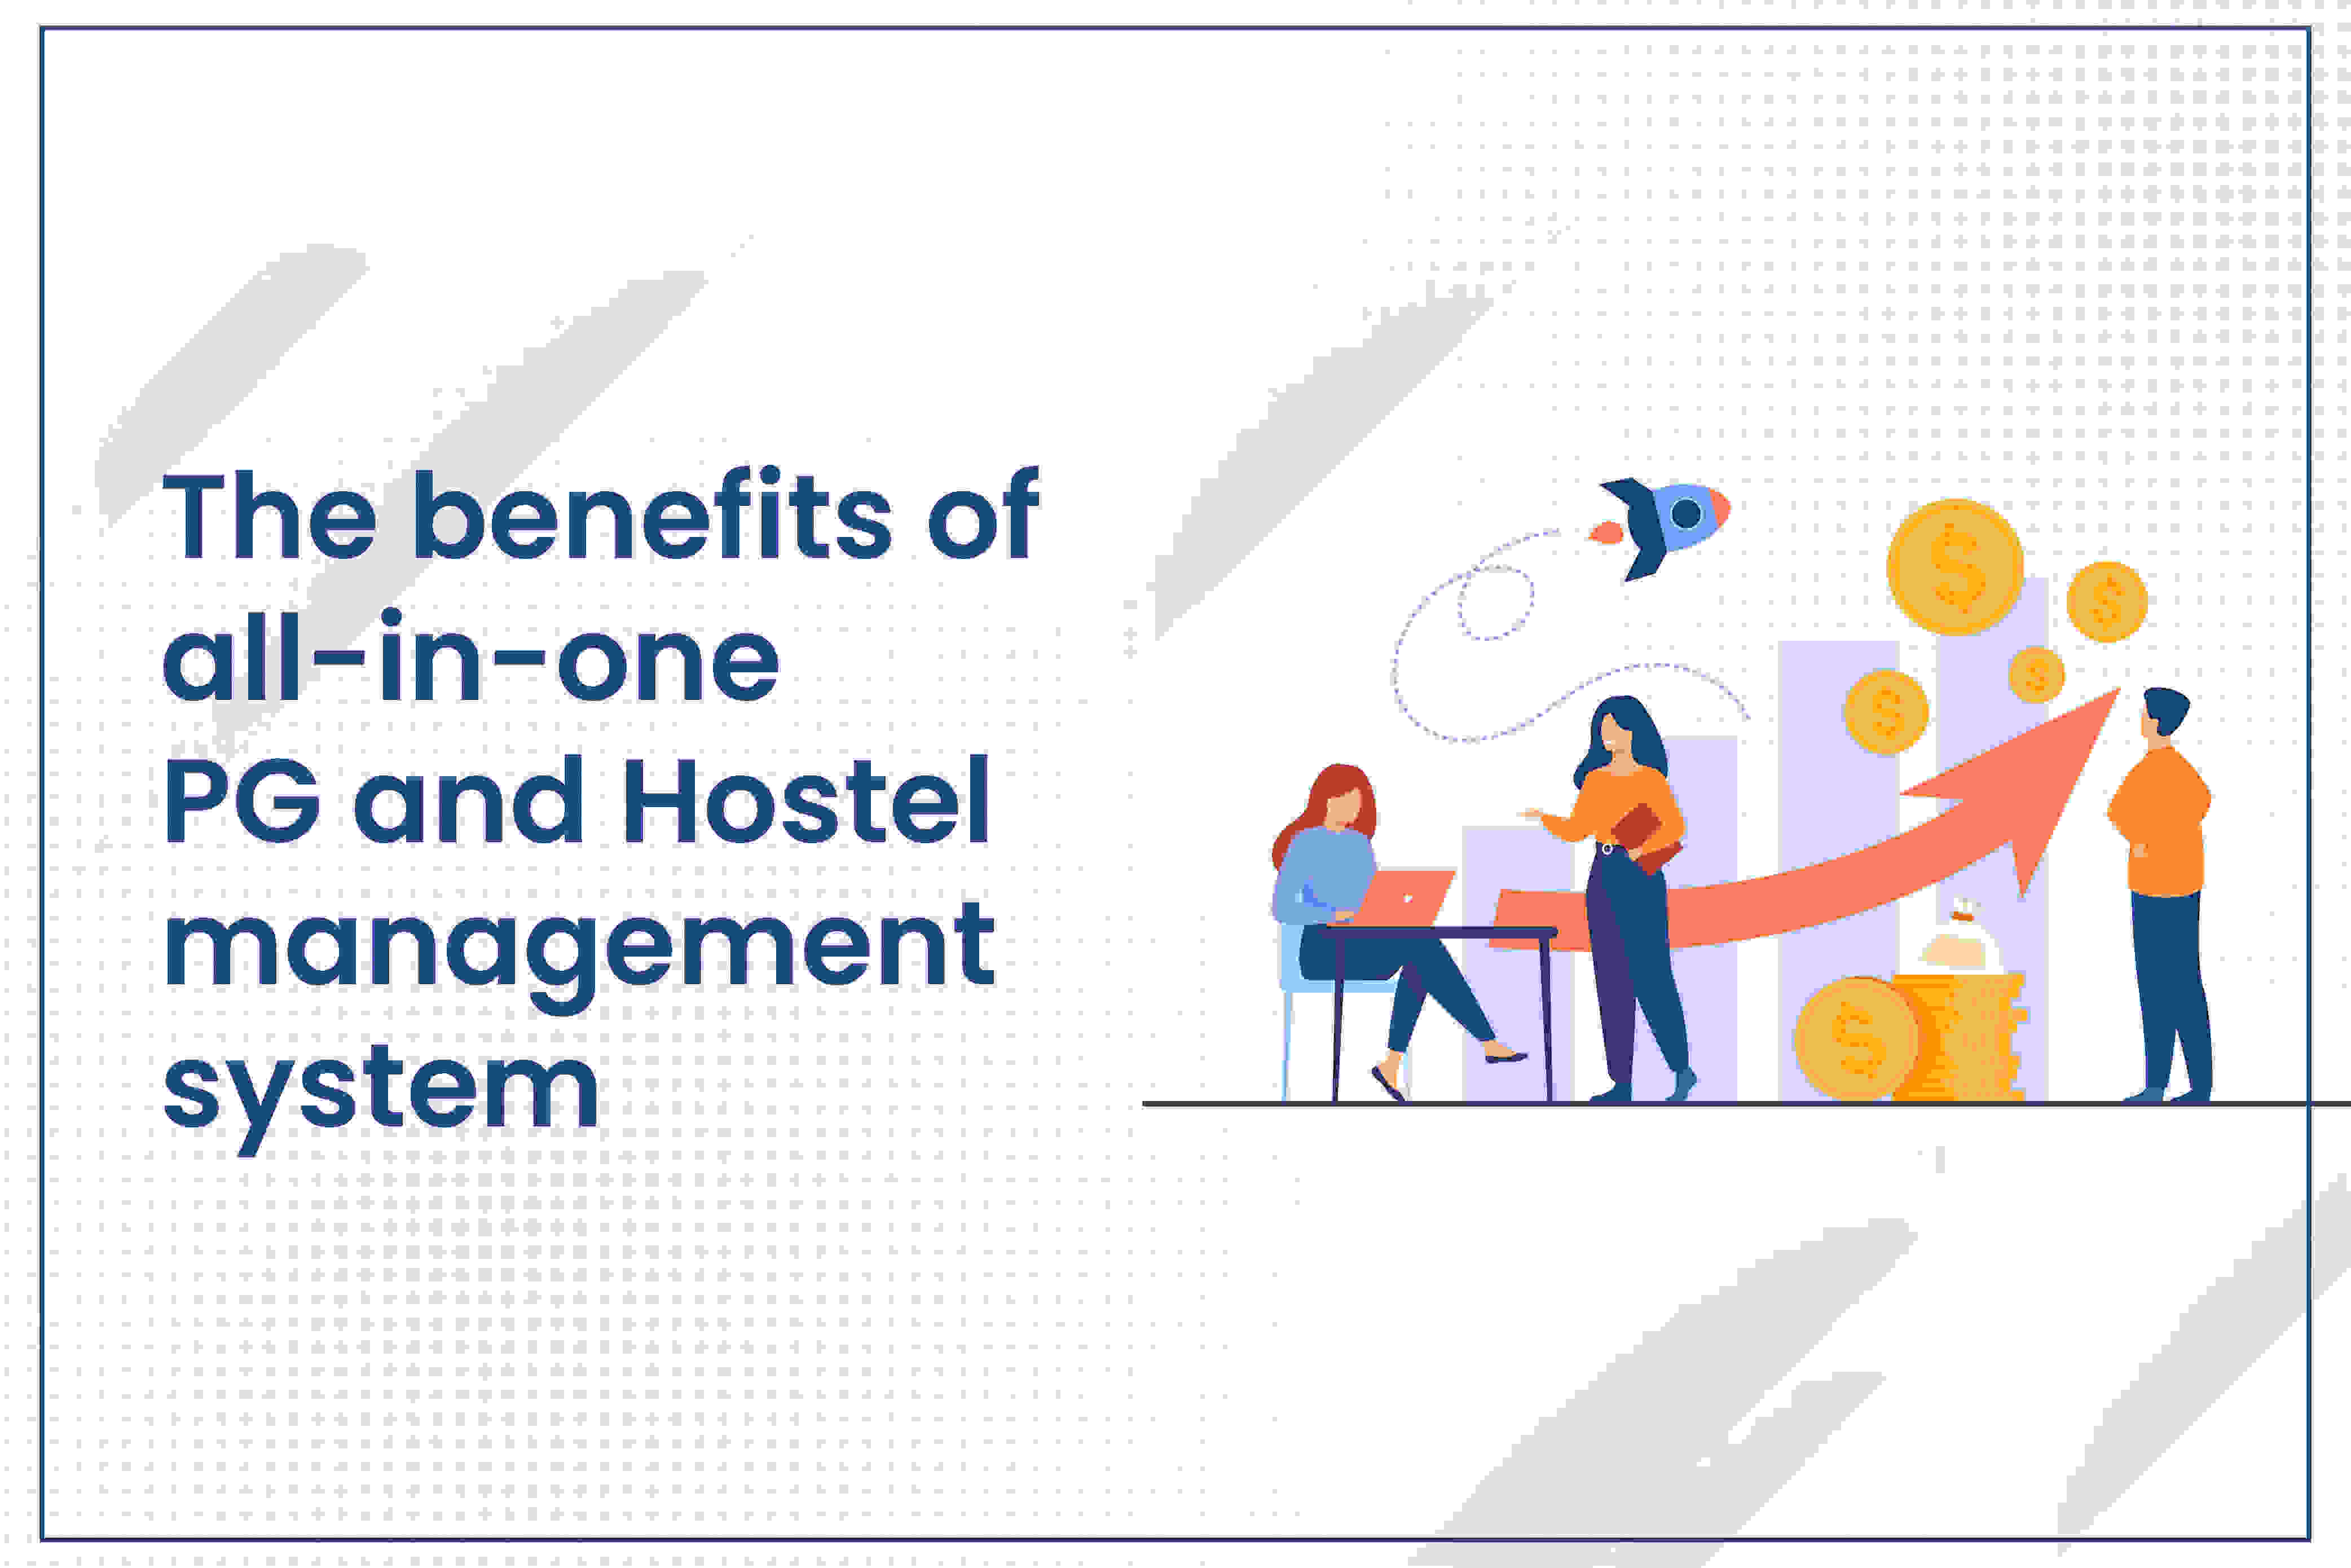 The benefits of all-in-one PG and Hostel management system